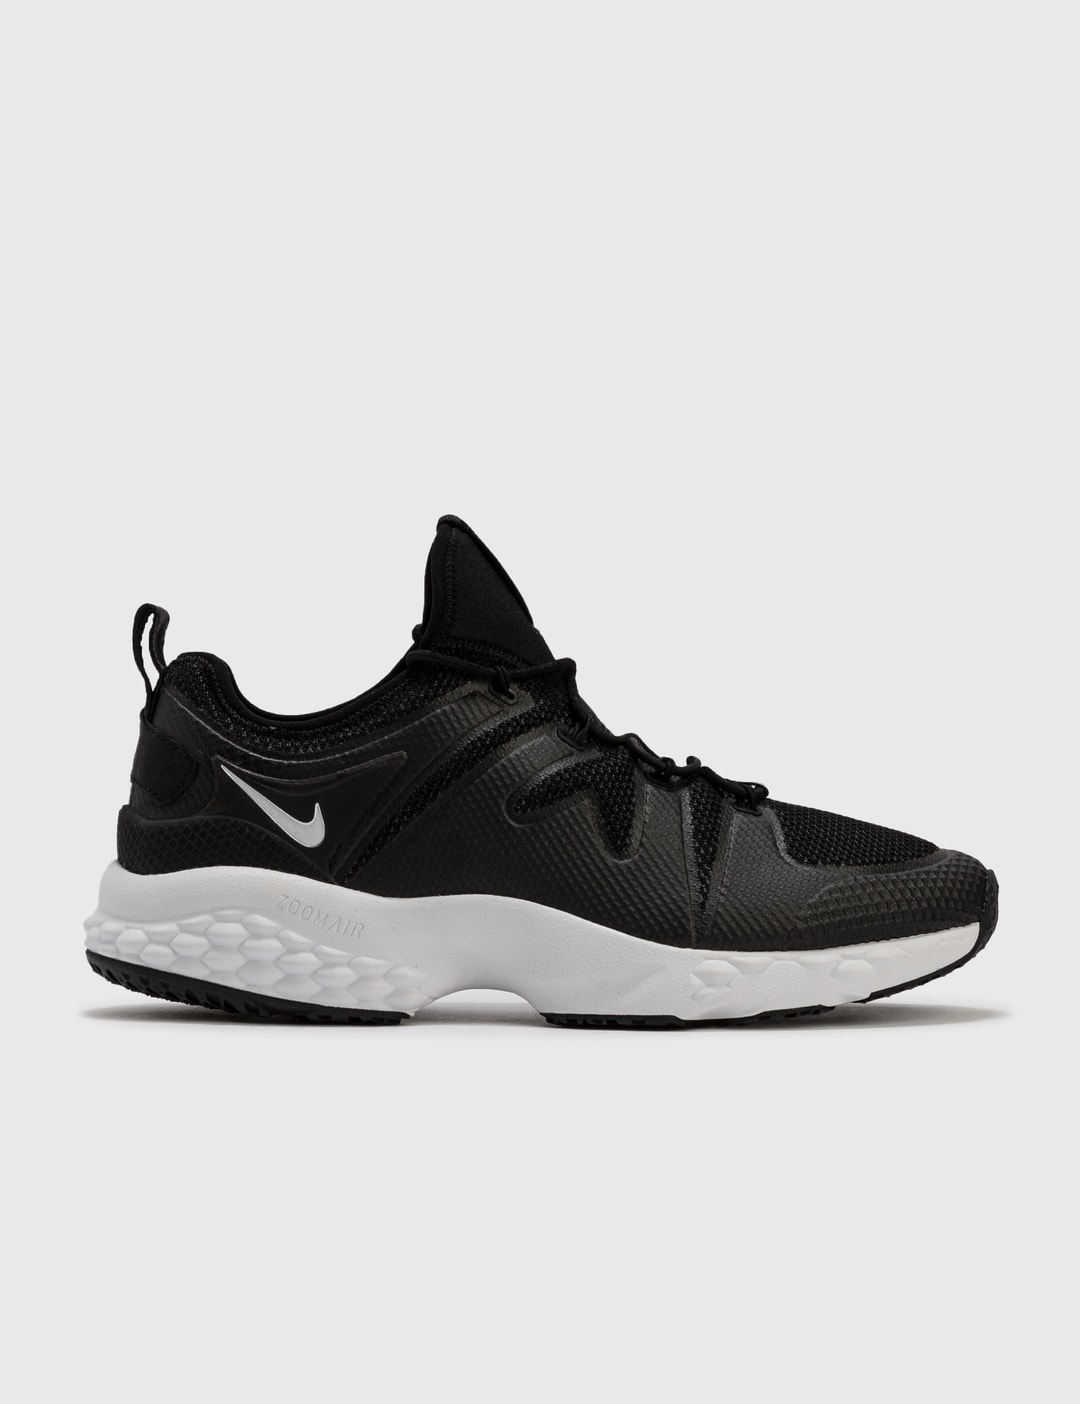 Nike - Kim Jones X Nike Air Zoom Lwp | HBX - Globally Curated Fashion and Lifestyle by